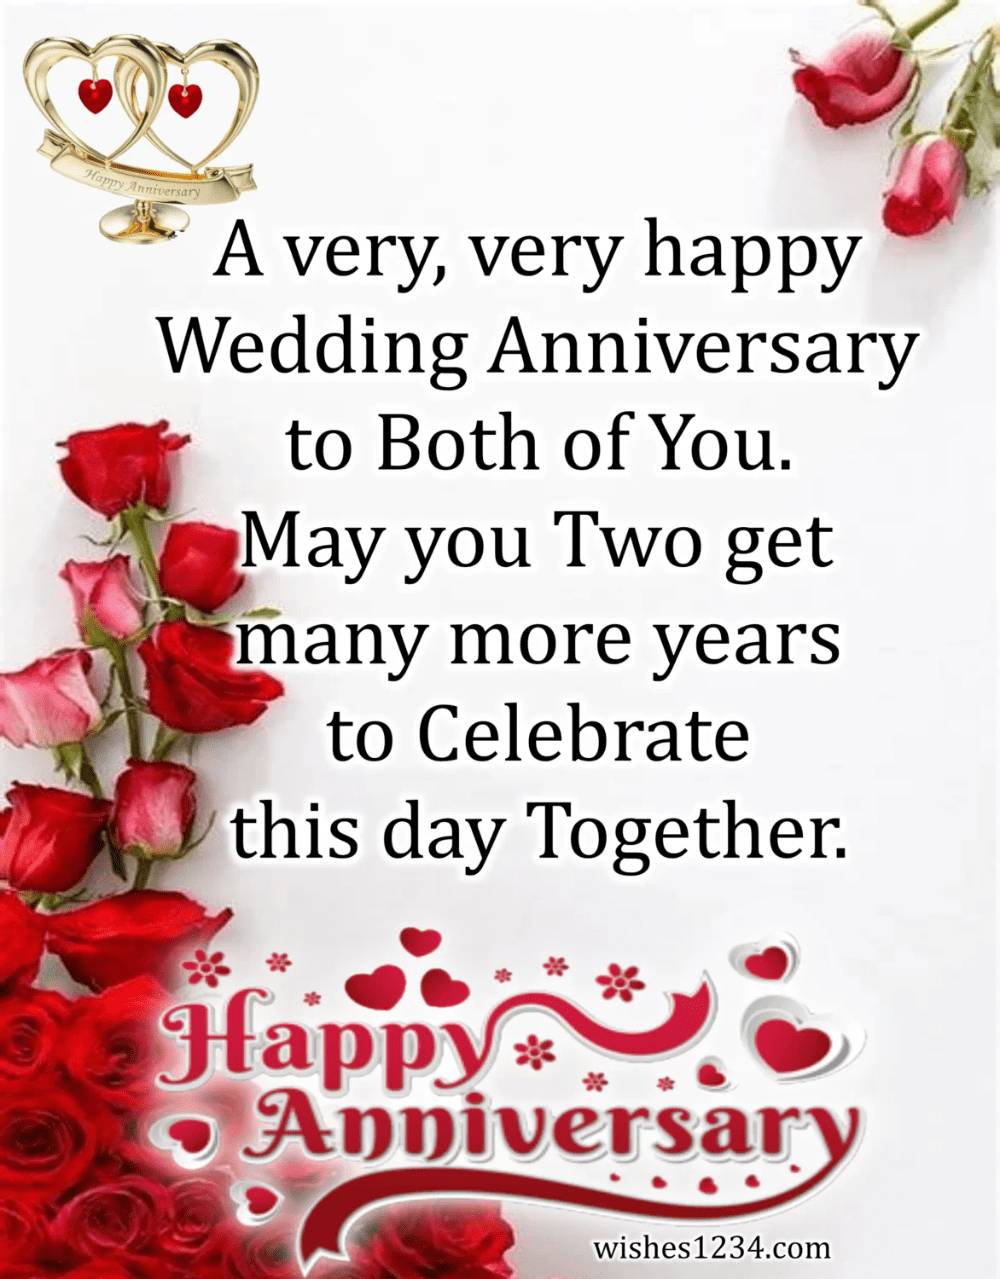 150+ Happy Wedding Anniversary Wishes, Messages & Quotes